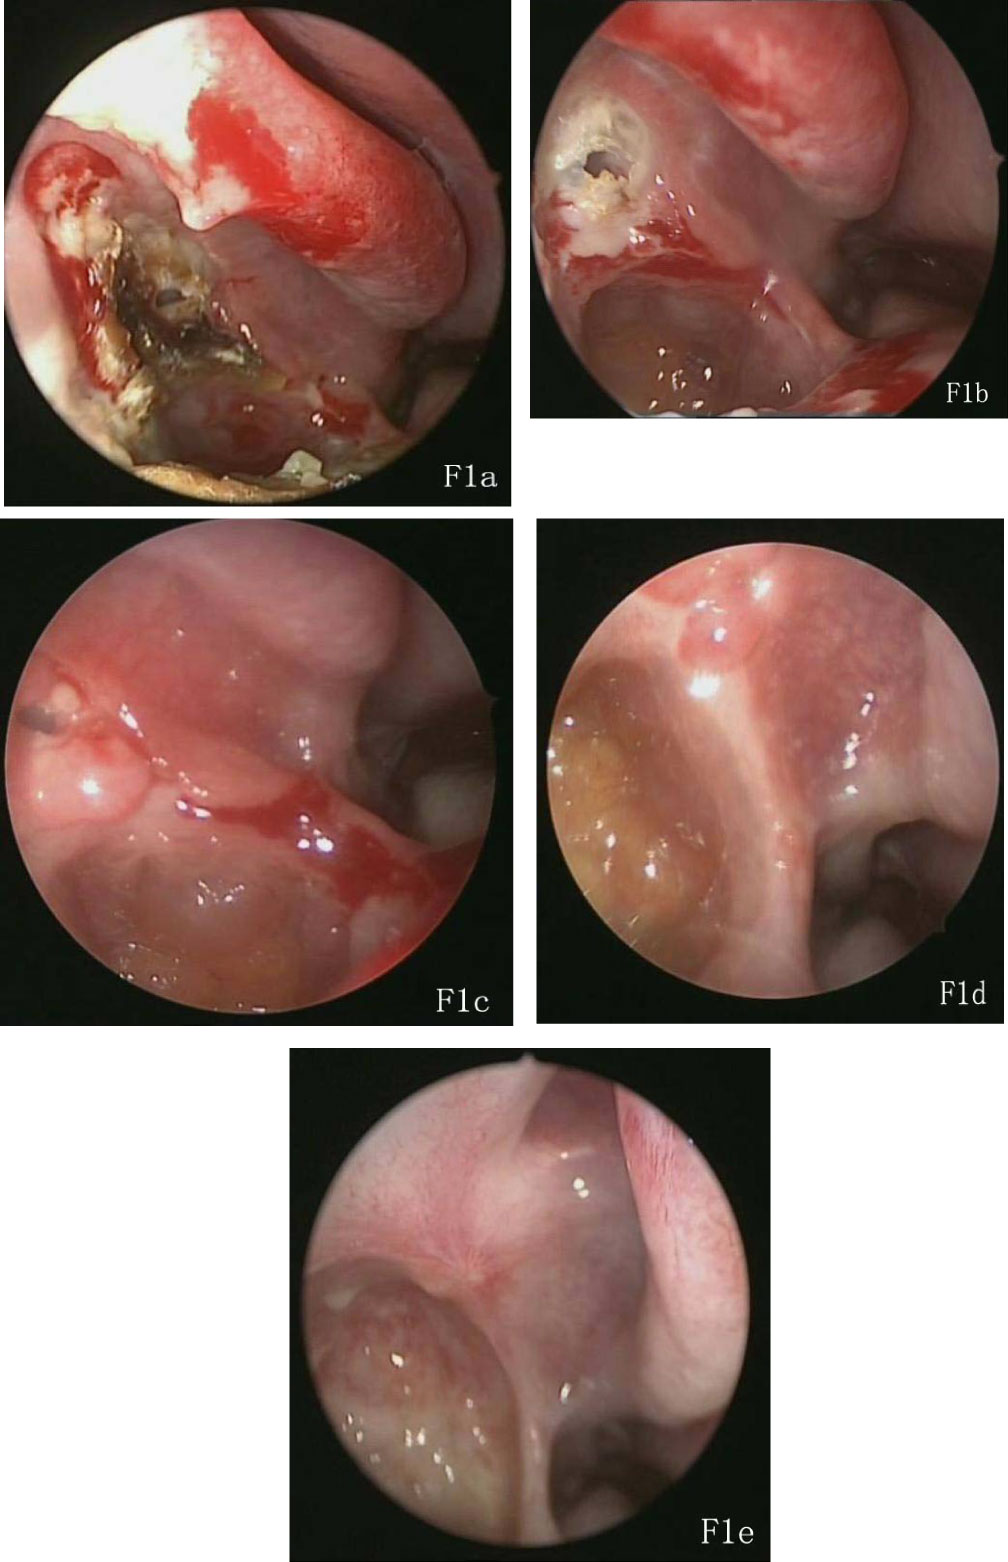 Coblation Assisted Functional Endoscopic Sinus Surgery Improve Prognosis Of The Patients With Chronic Rhinosinusitis And Nasal Polyps